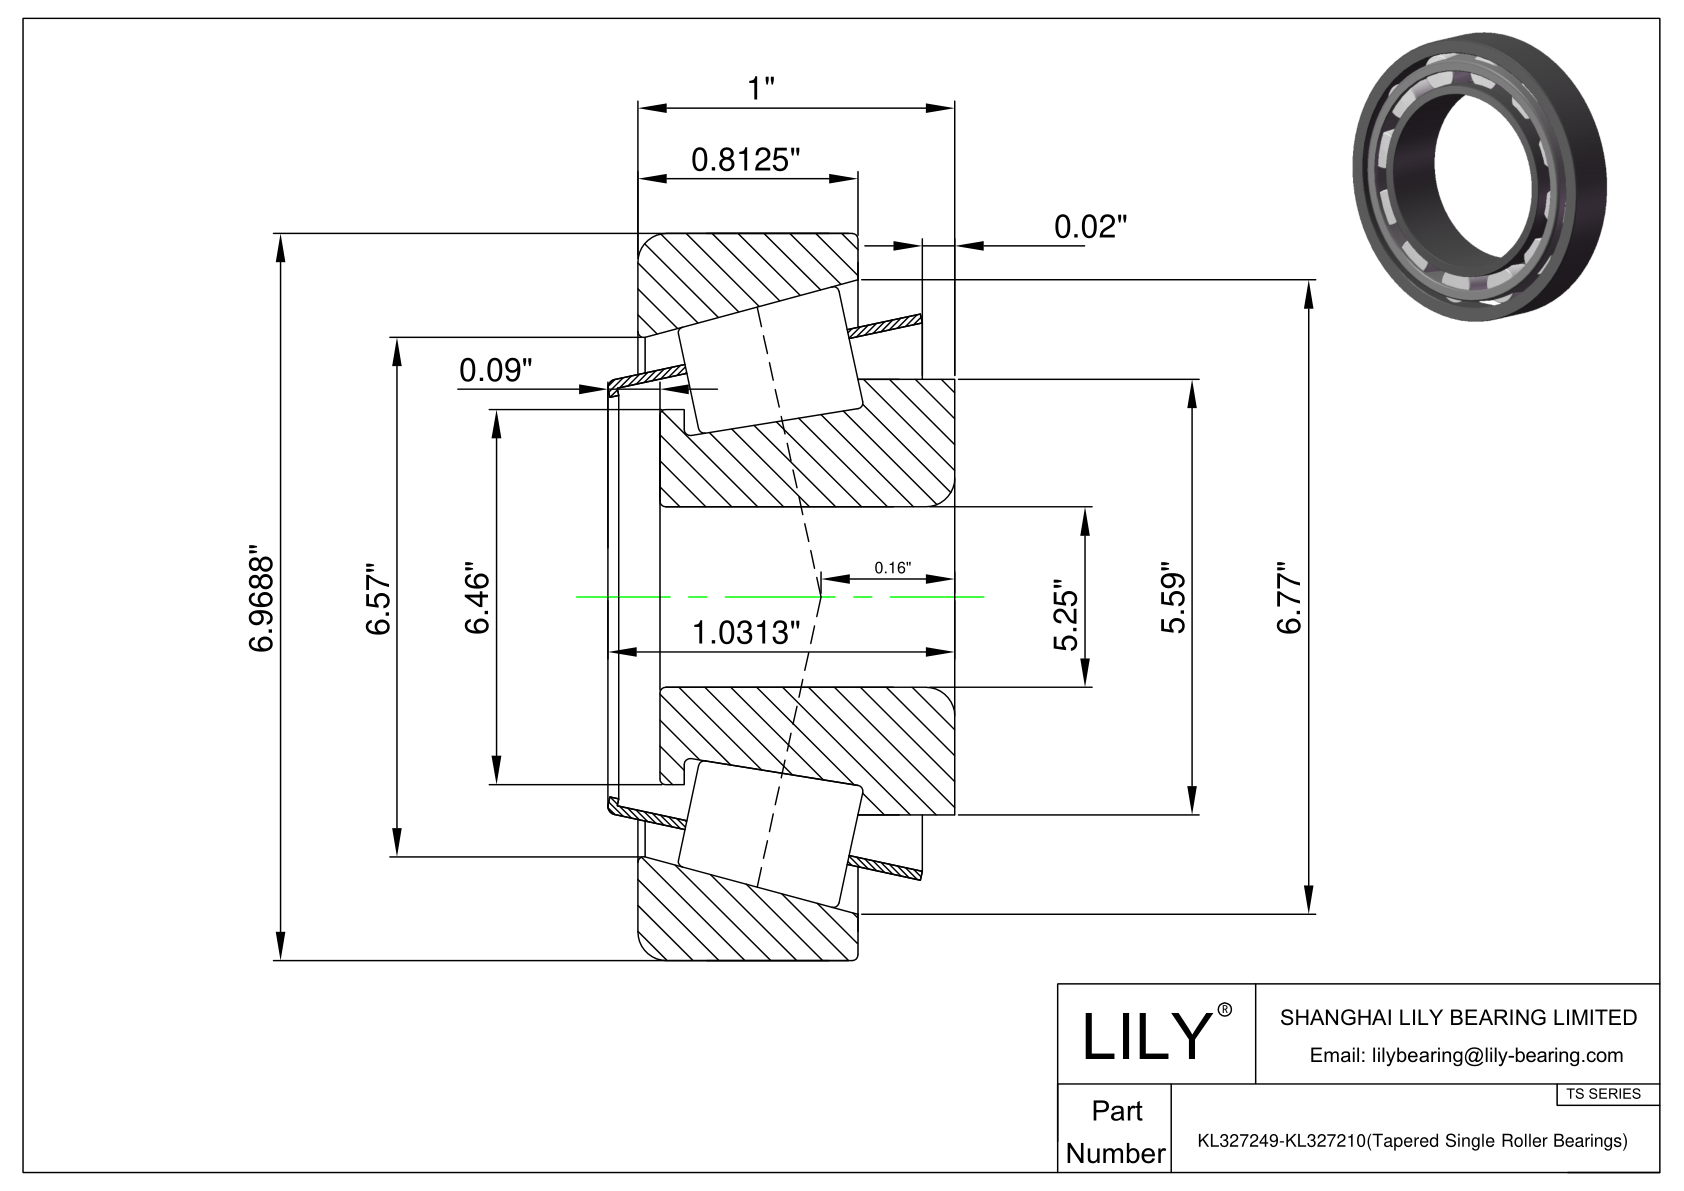 KL327249-KL327210 TS (Tapered Single Roller Bearings) (Imperial) cad drawing